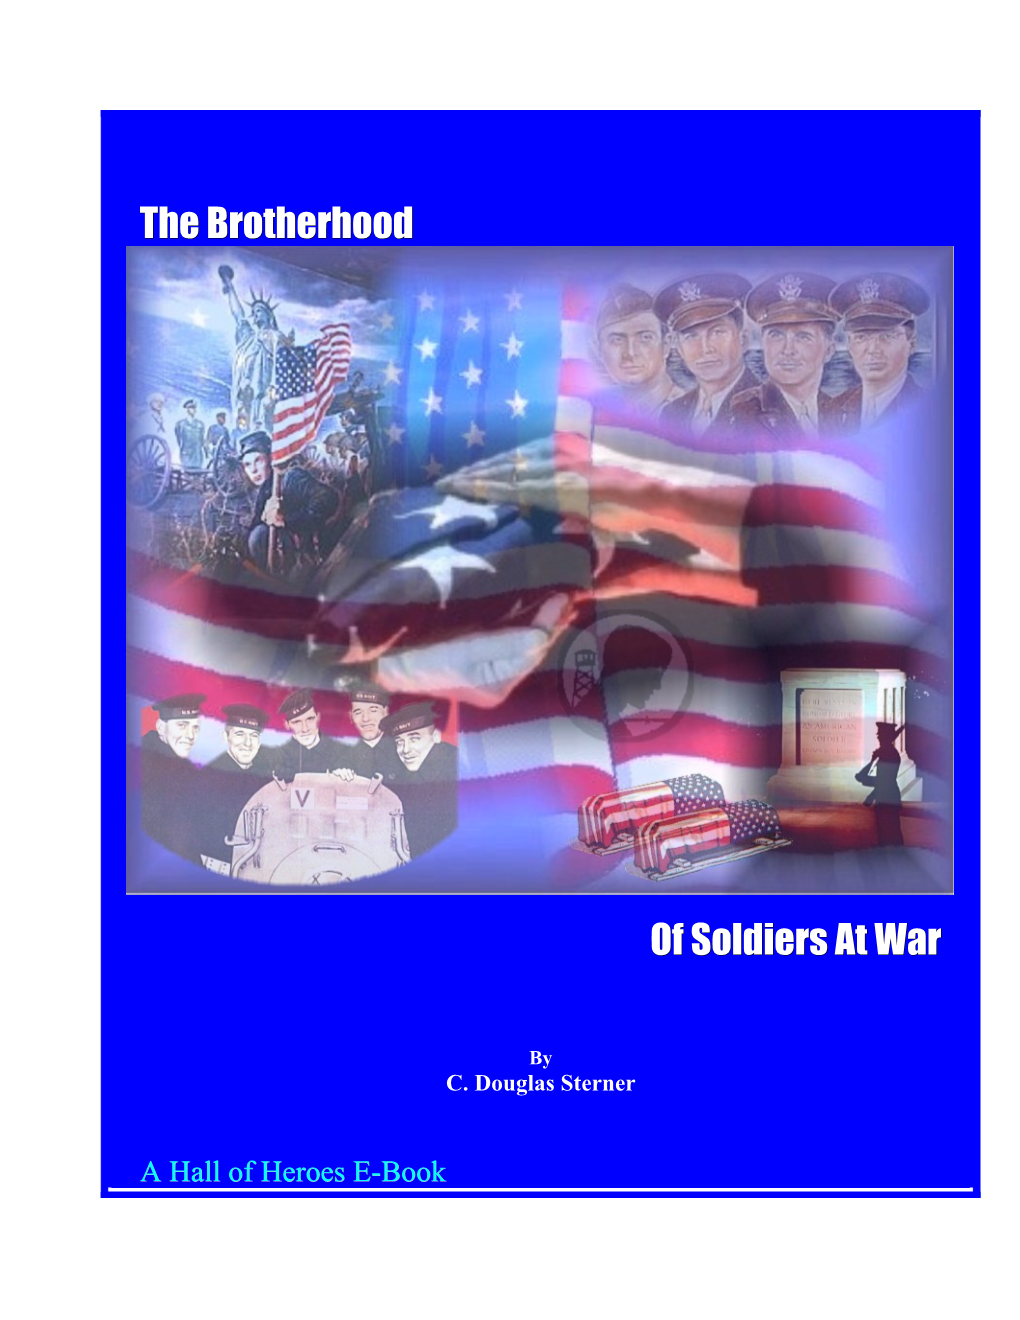 The Brotherhood of Soldiers at War